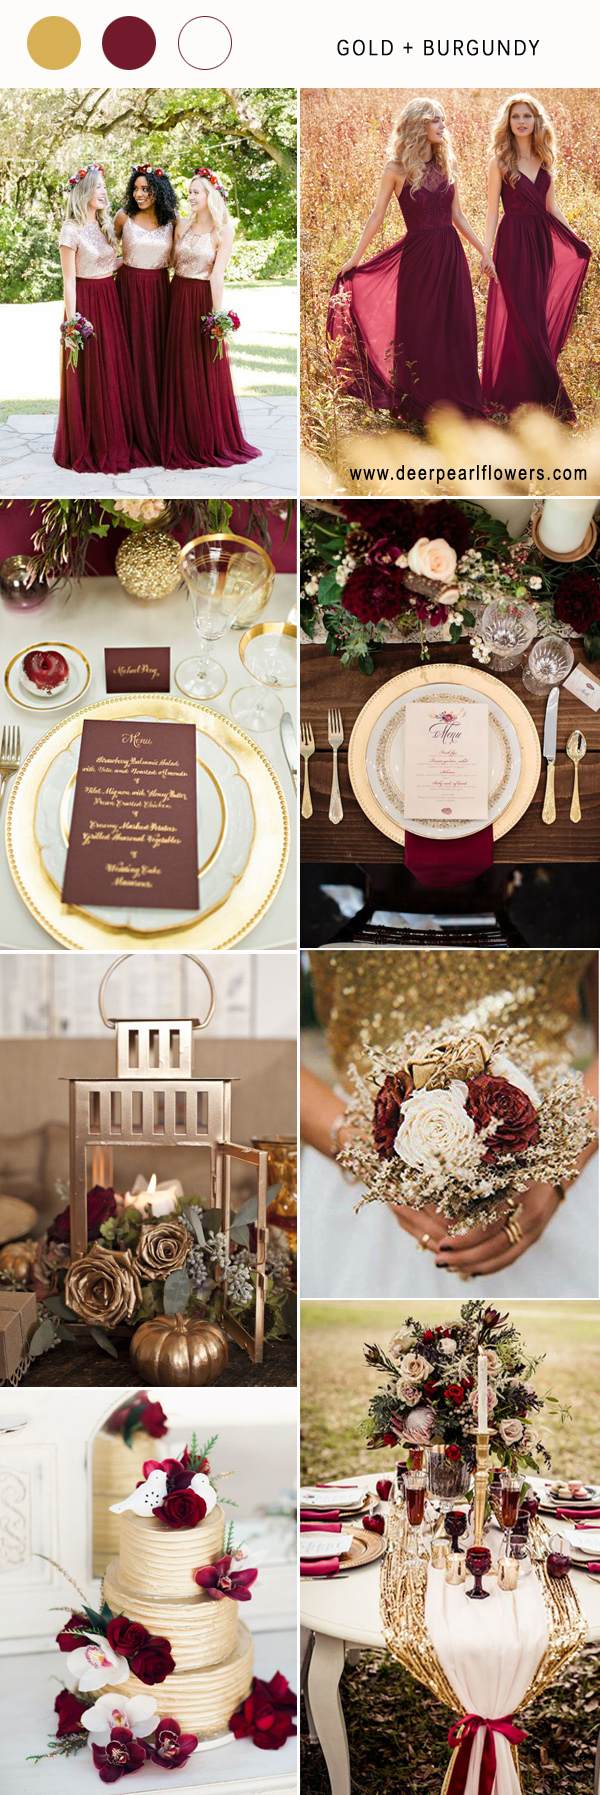 Gold and burgundy wedding color ideas